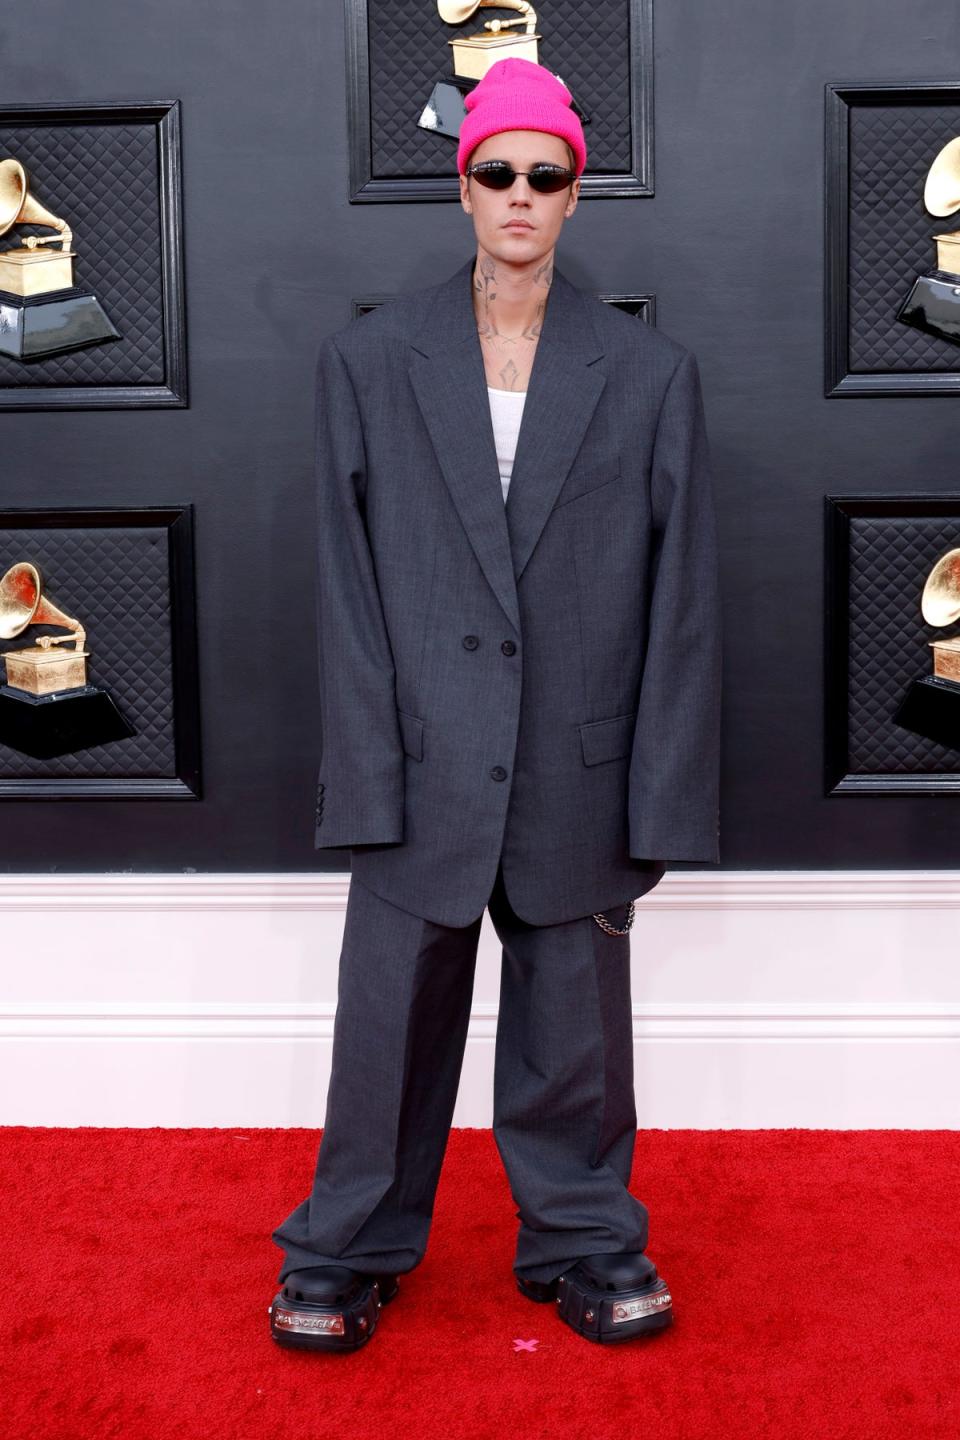 Justin Bieber wearing Croc-esque Balenciaga shoes to the 2022 Grammys (Getty Images for The Recording A)